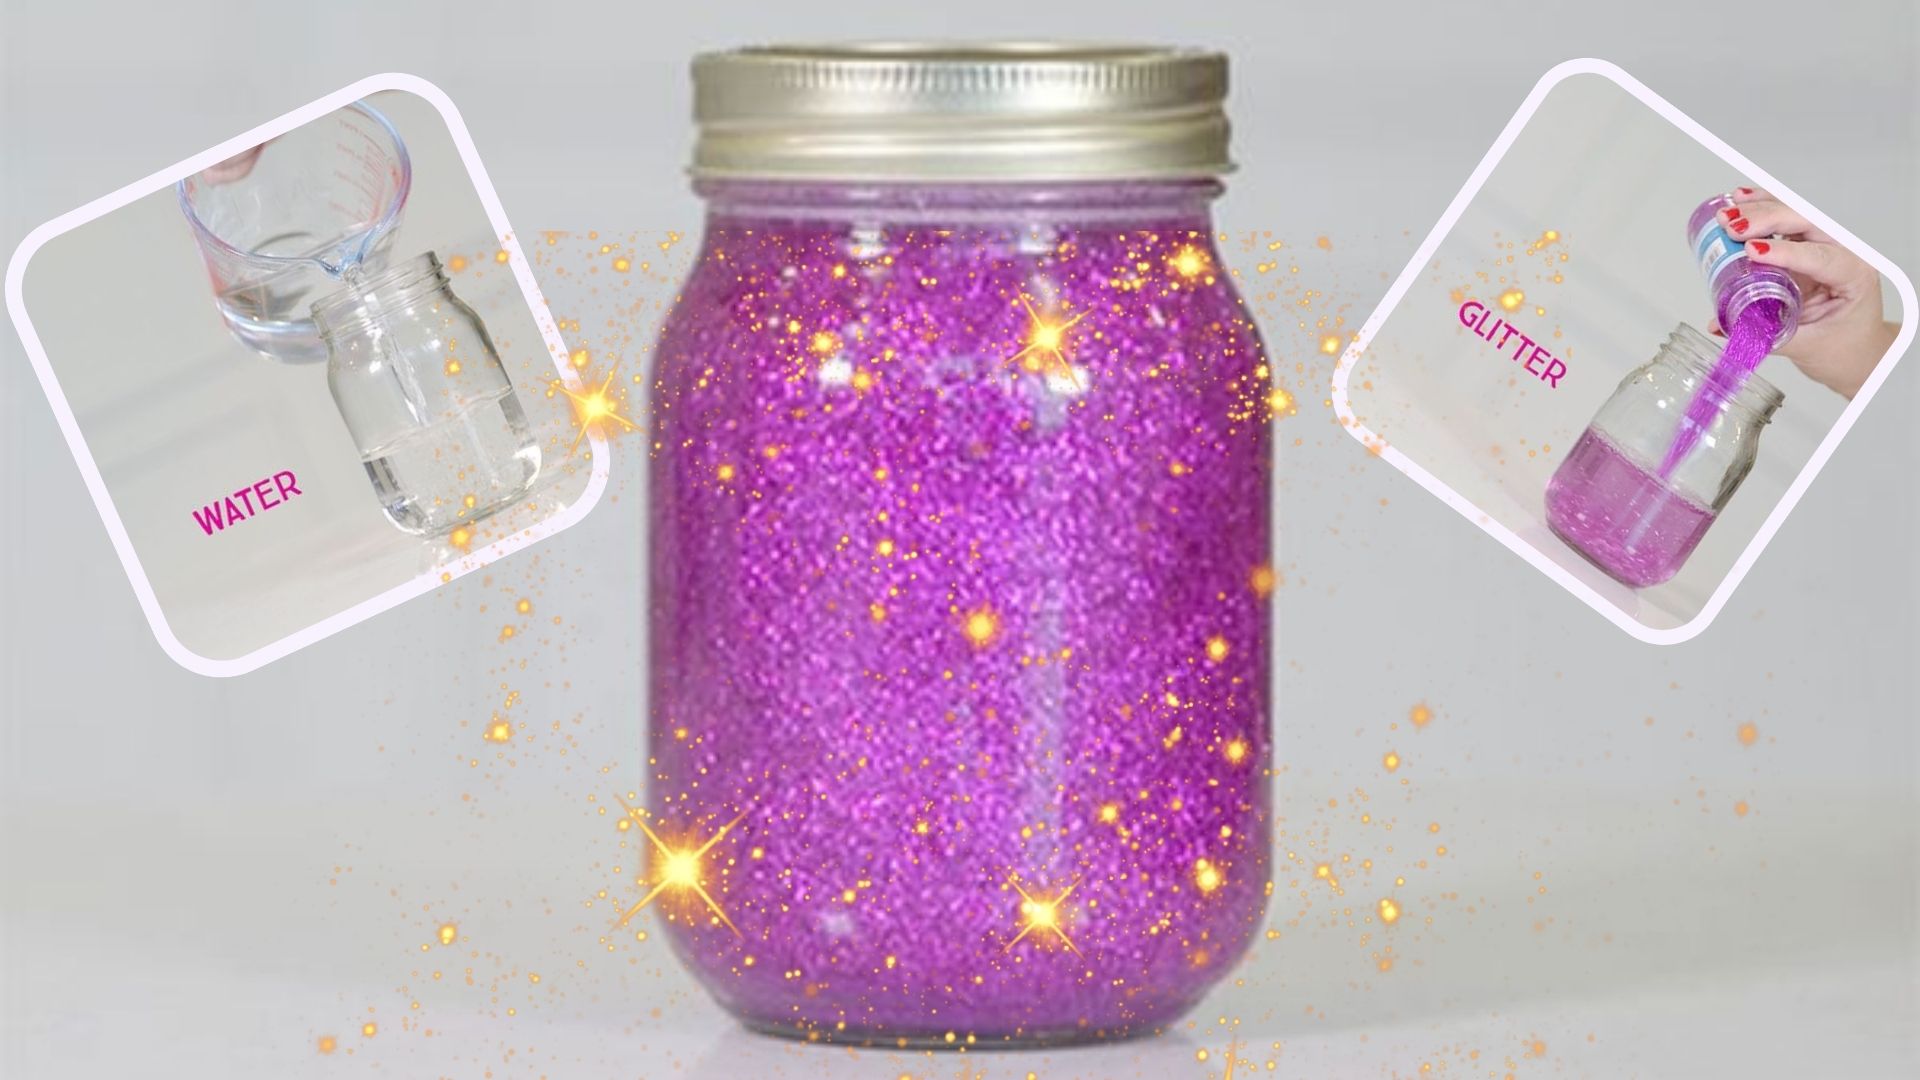 Jar of wishes! - A little love everyday!